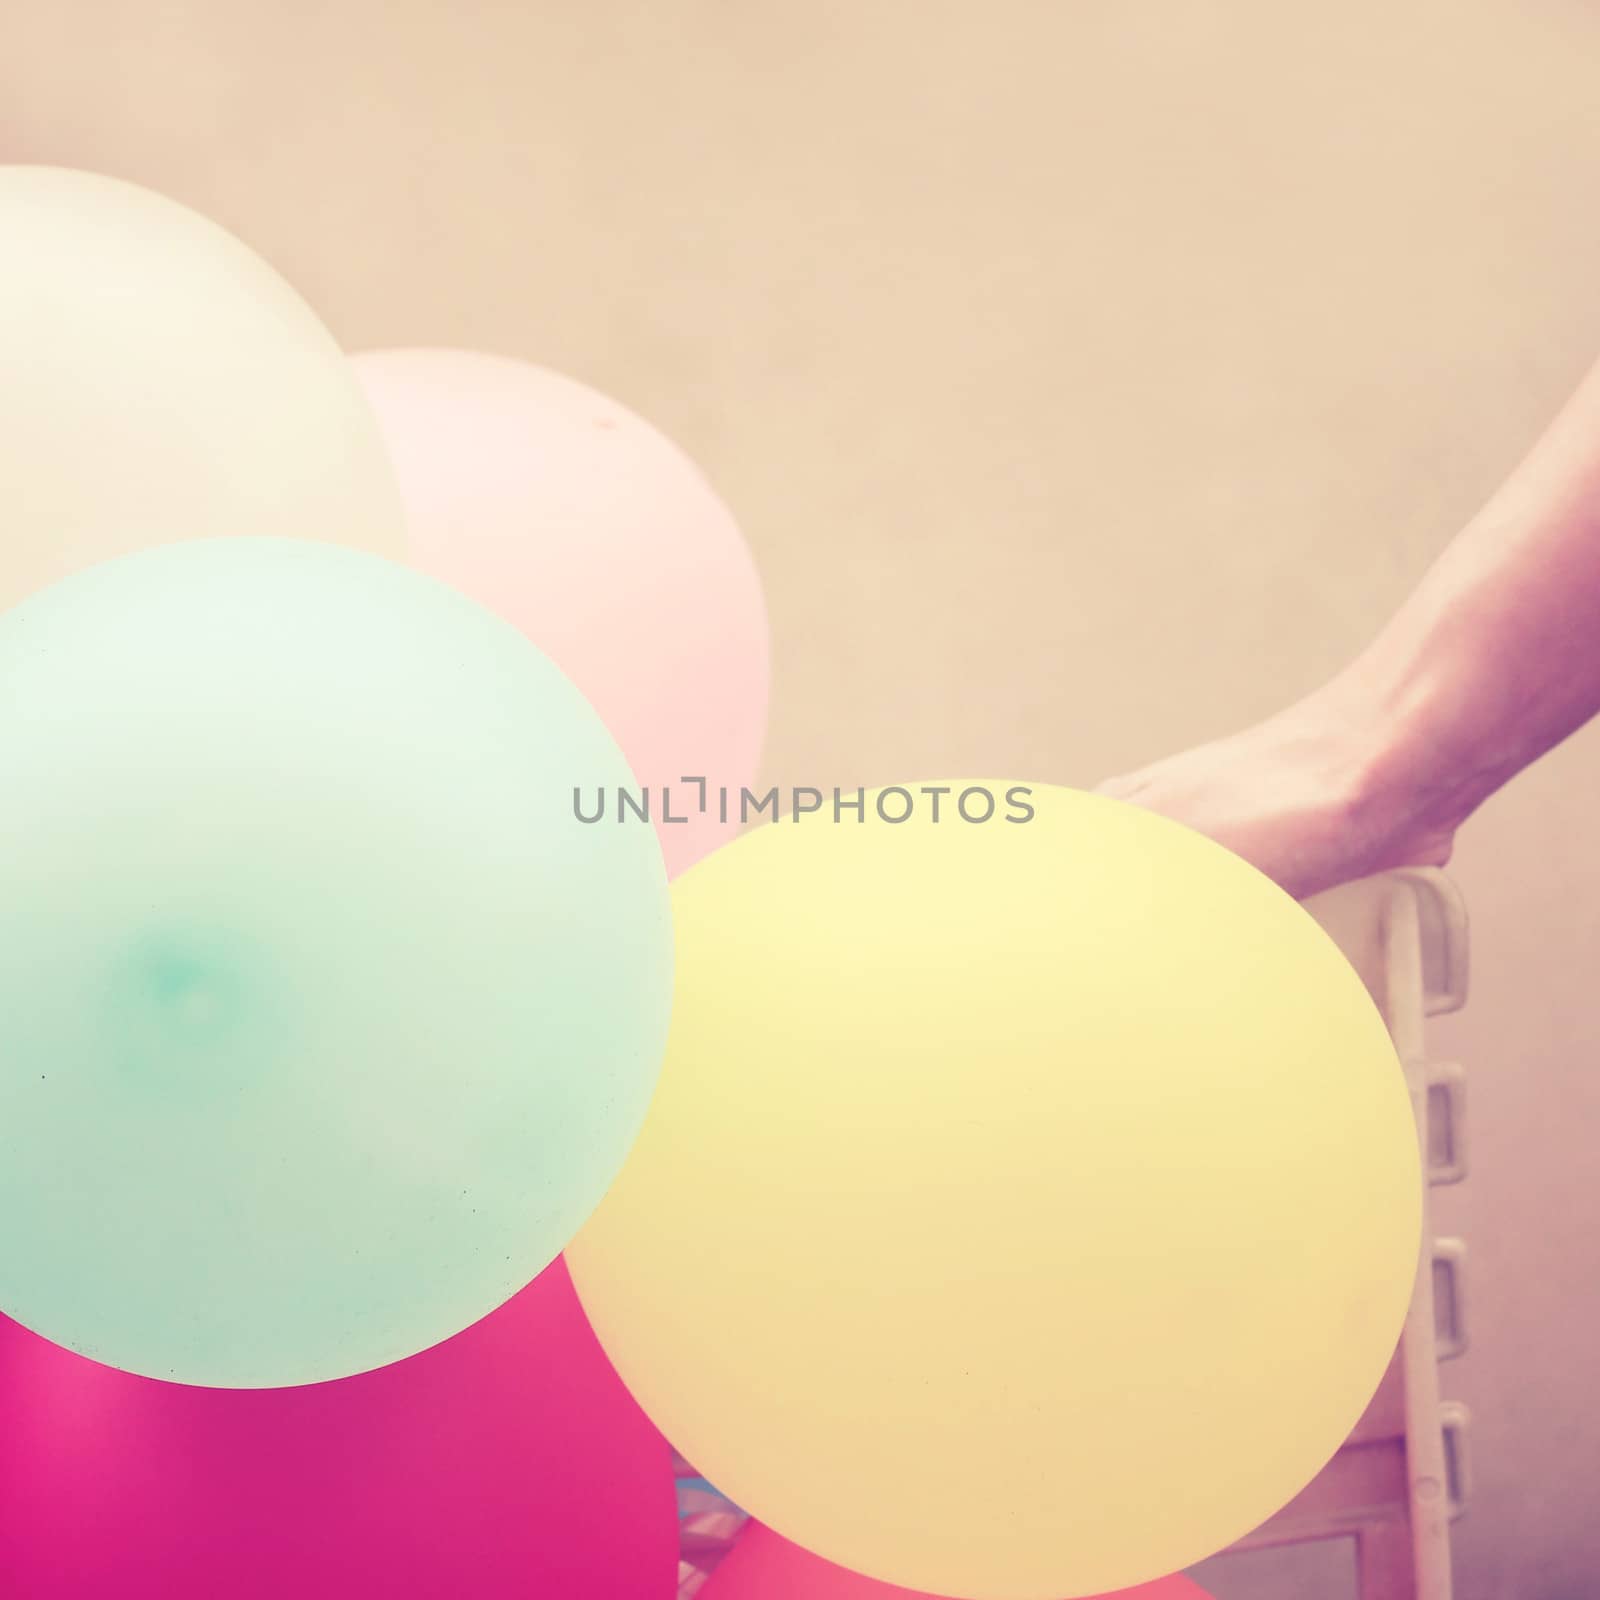 Colorful balloons with hand on chair, retro filter effect by nuchylee